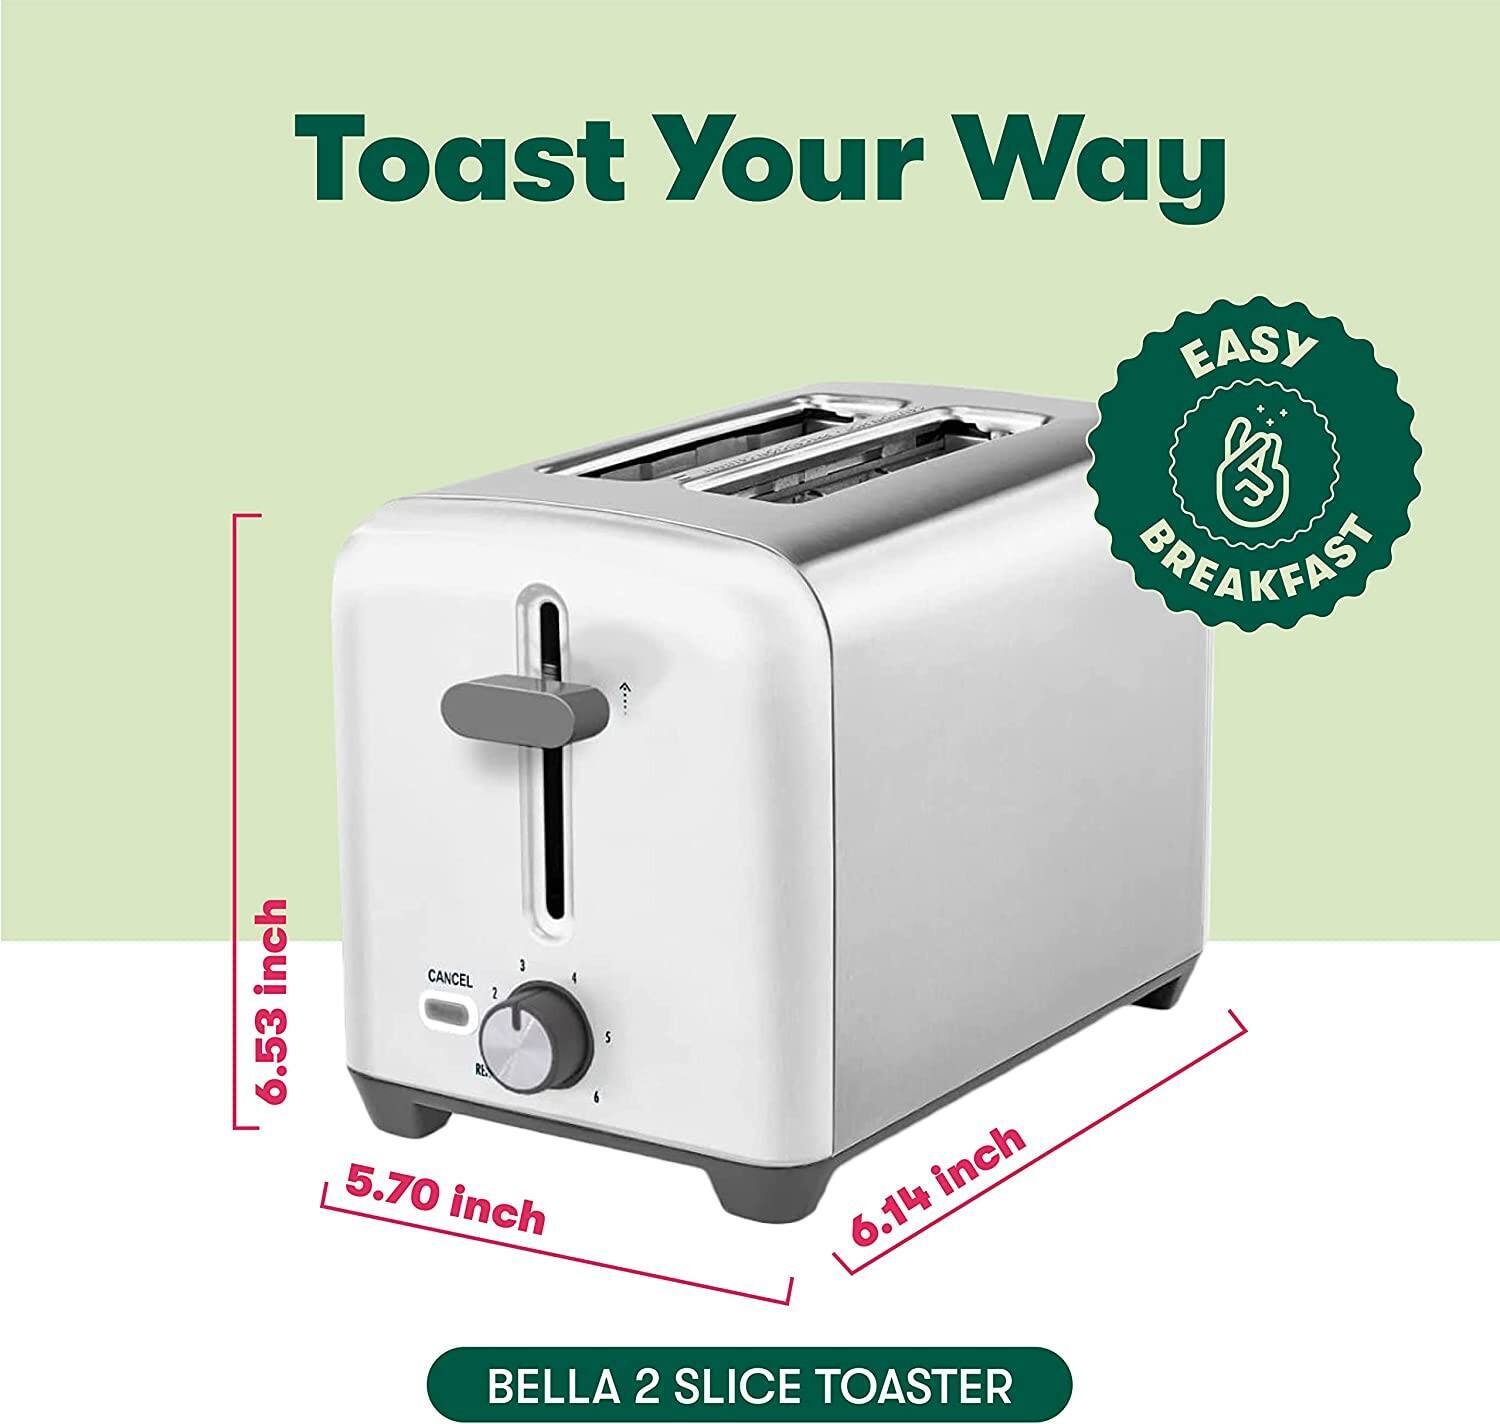 2 Slice Toaster with Extra Wide Slots & Removable Crumb Tray - 6 Browning Options, Auto Shut Off & Reheat Function - Toast Bread, Bagel & Waffle